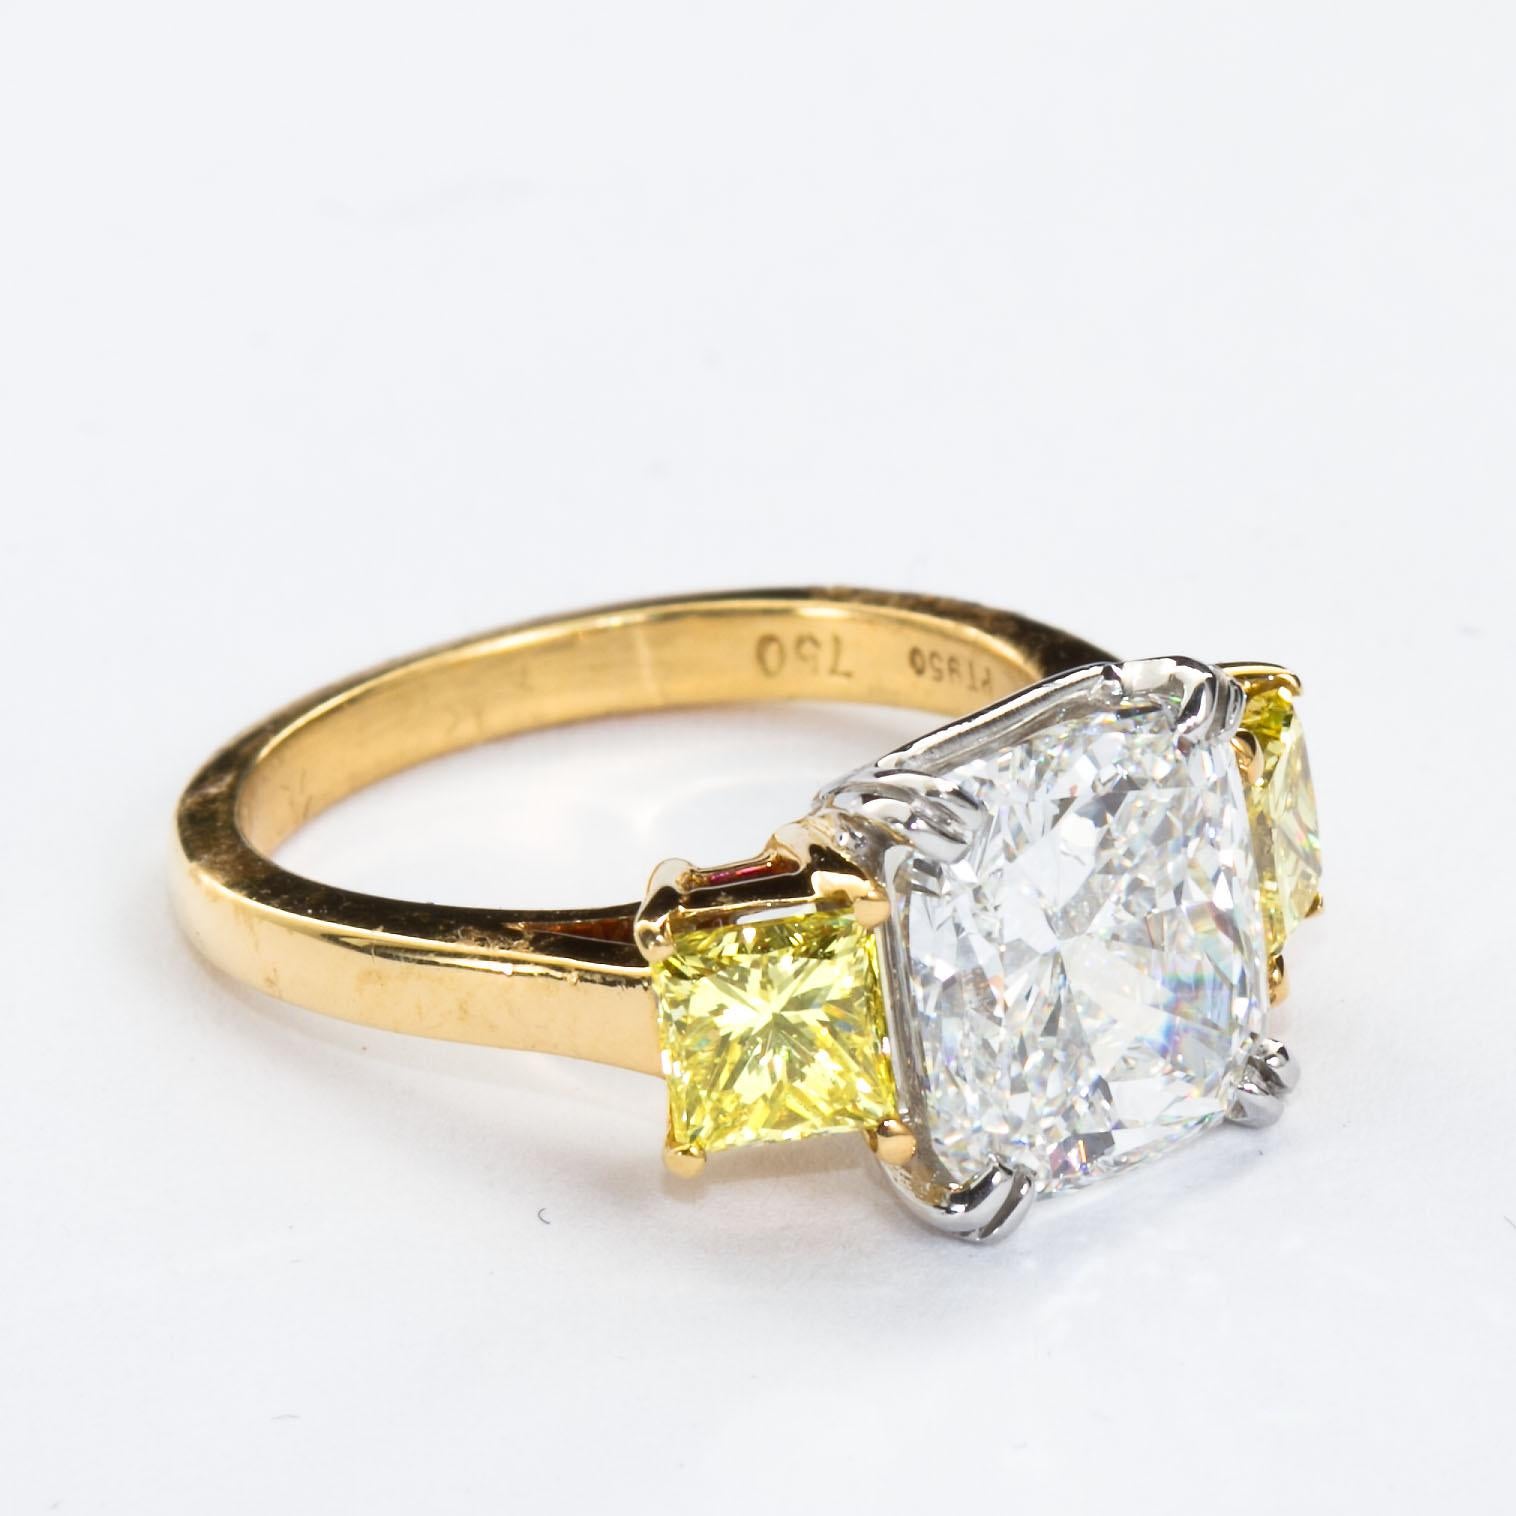 3.55 Carat Cushion Cut Diamond and Fancy Intense Yellow Princess Sides Ring GIA In Excellent Condition For Sale In Lakewood, NJ